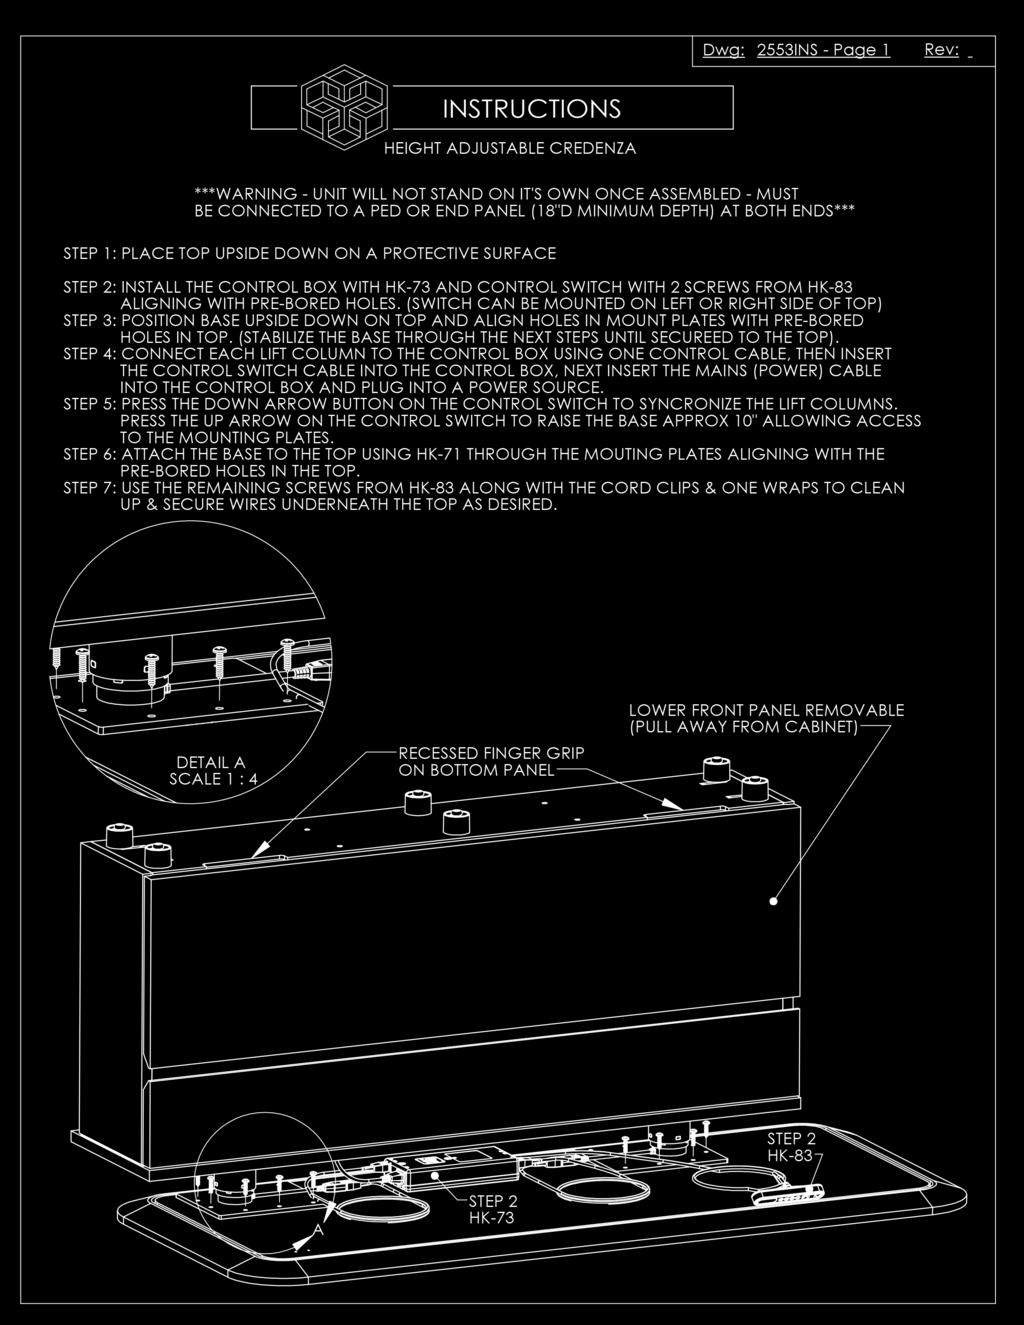 PART # 1711256 INSTRUCTION SHEET # 2553INS HEIGHT ADJUSTABLE CREDENZA WARNING: UNIT WILL NOT STAND ON IT S OWN ONCE ASSEMBLED. MUST BE CONNECTED TO A PED OR END PANEL AT BOTH ENDS (18 D minimum). 1. Place top upside down on a protective surface.